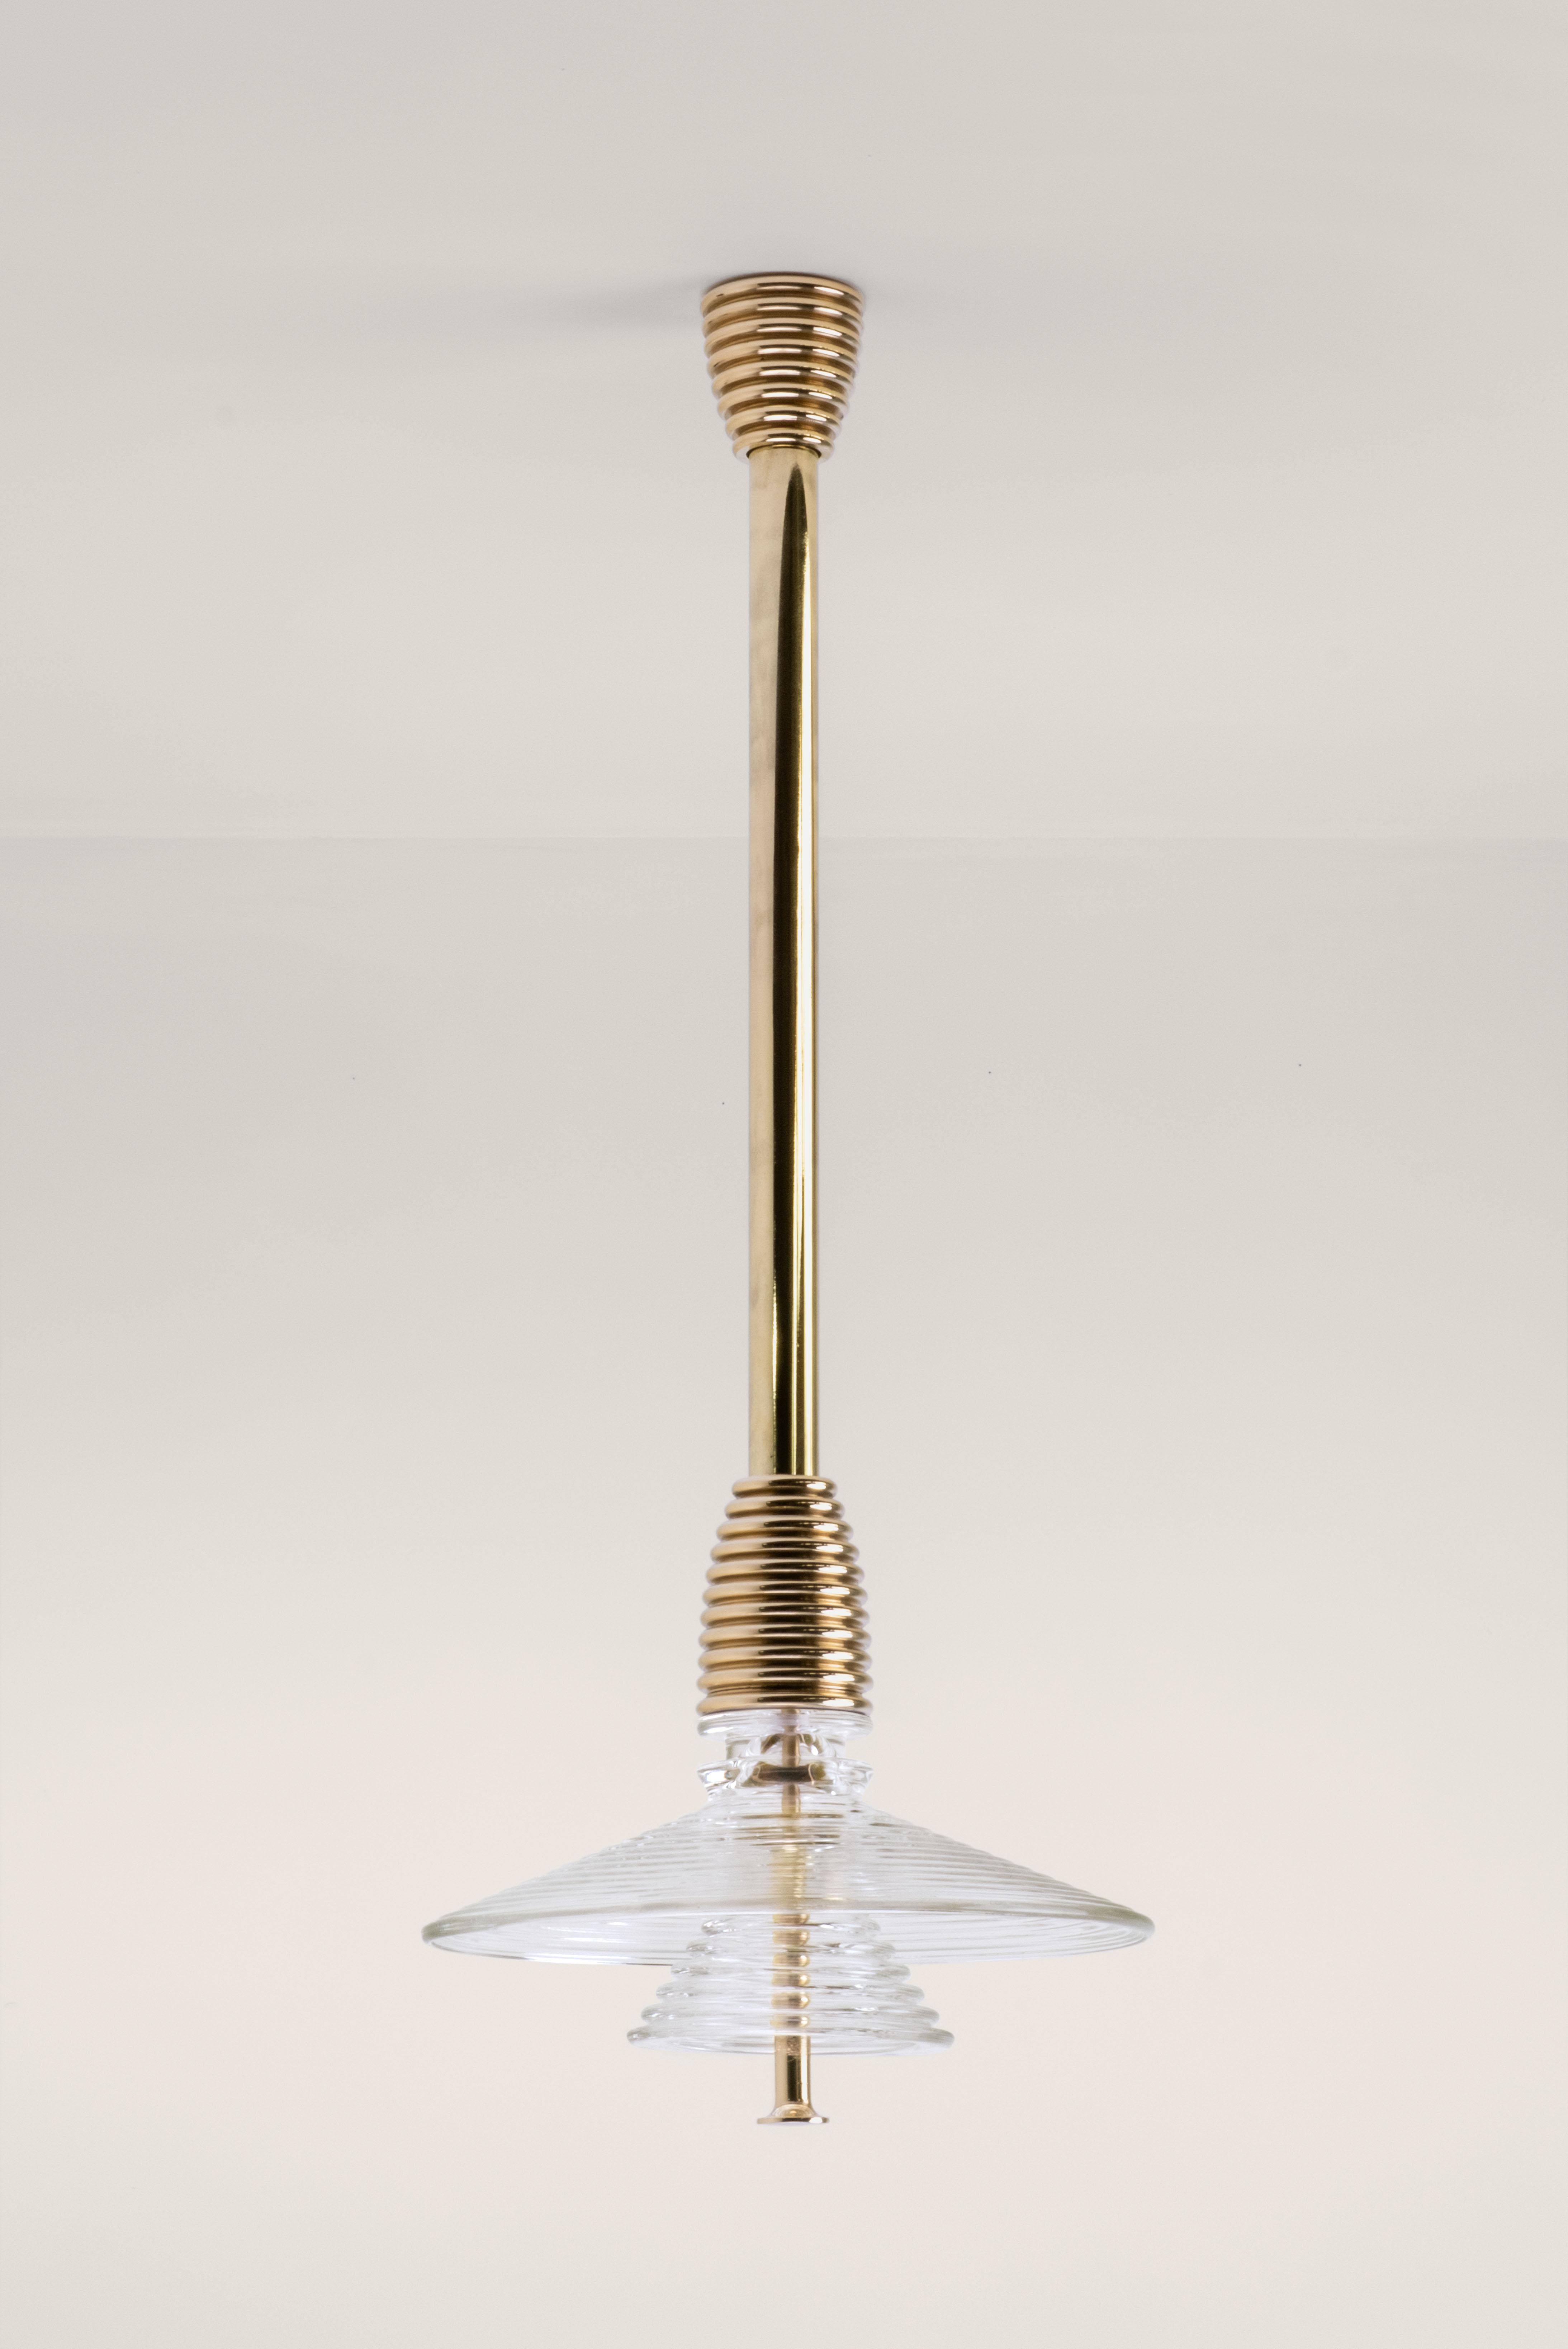 Brass The Insulator 'AB' Pendant in dark brass and clear glass by NOVOCASTRIAN deco For Sale